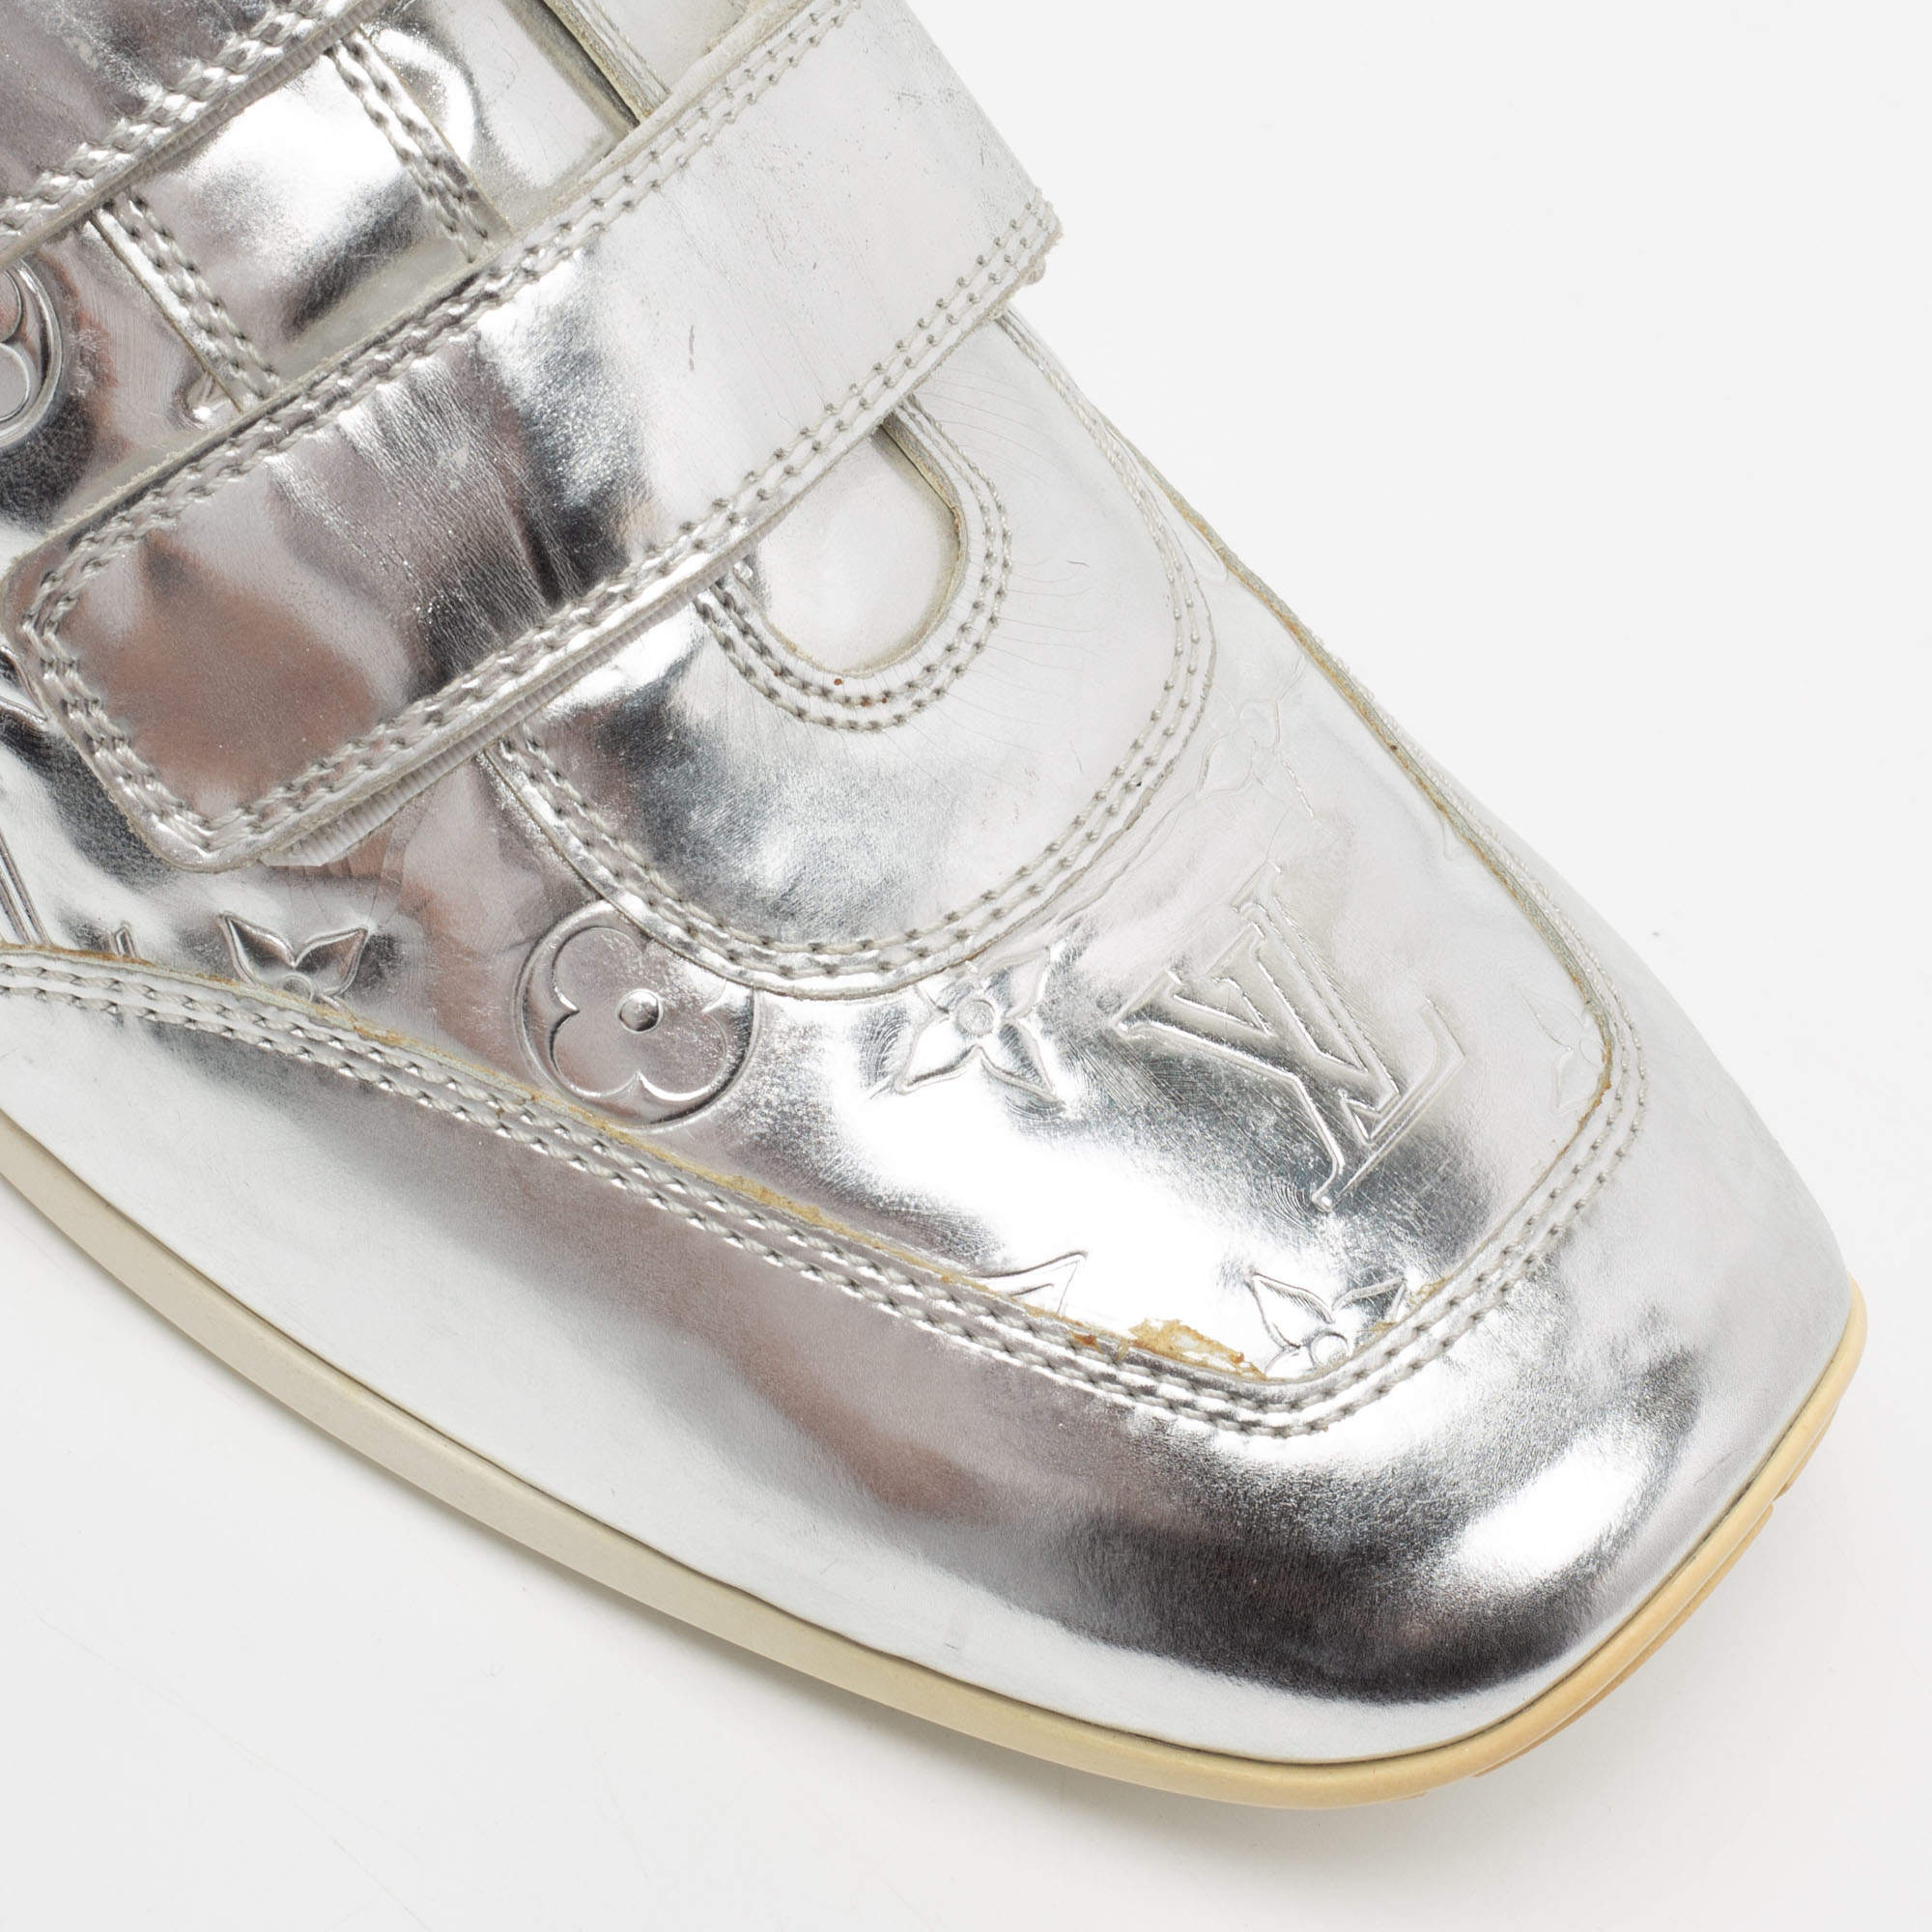 Louis Vuitton Metallic Silver Monogram Leather Trainers Lace Up